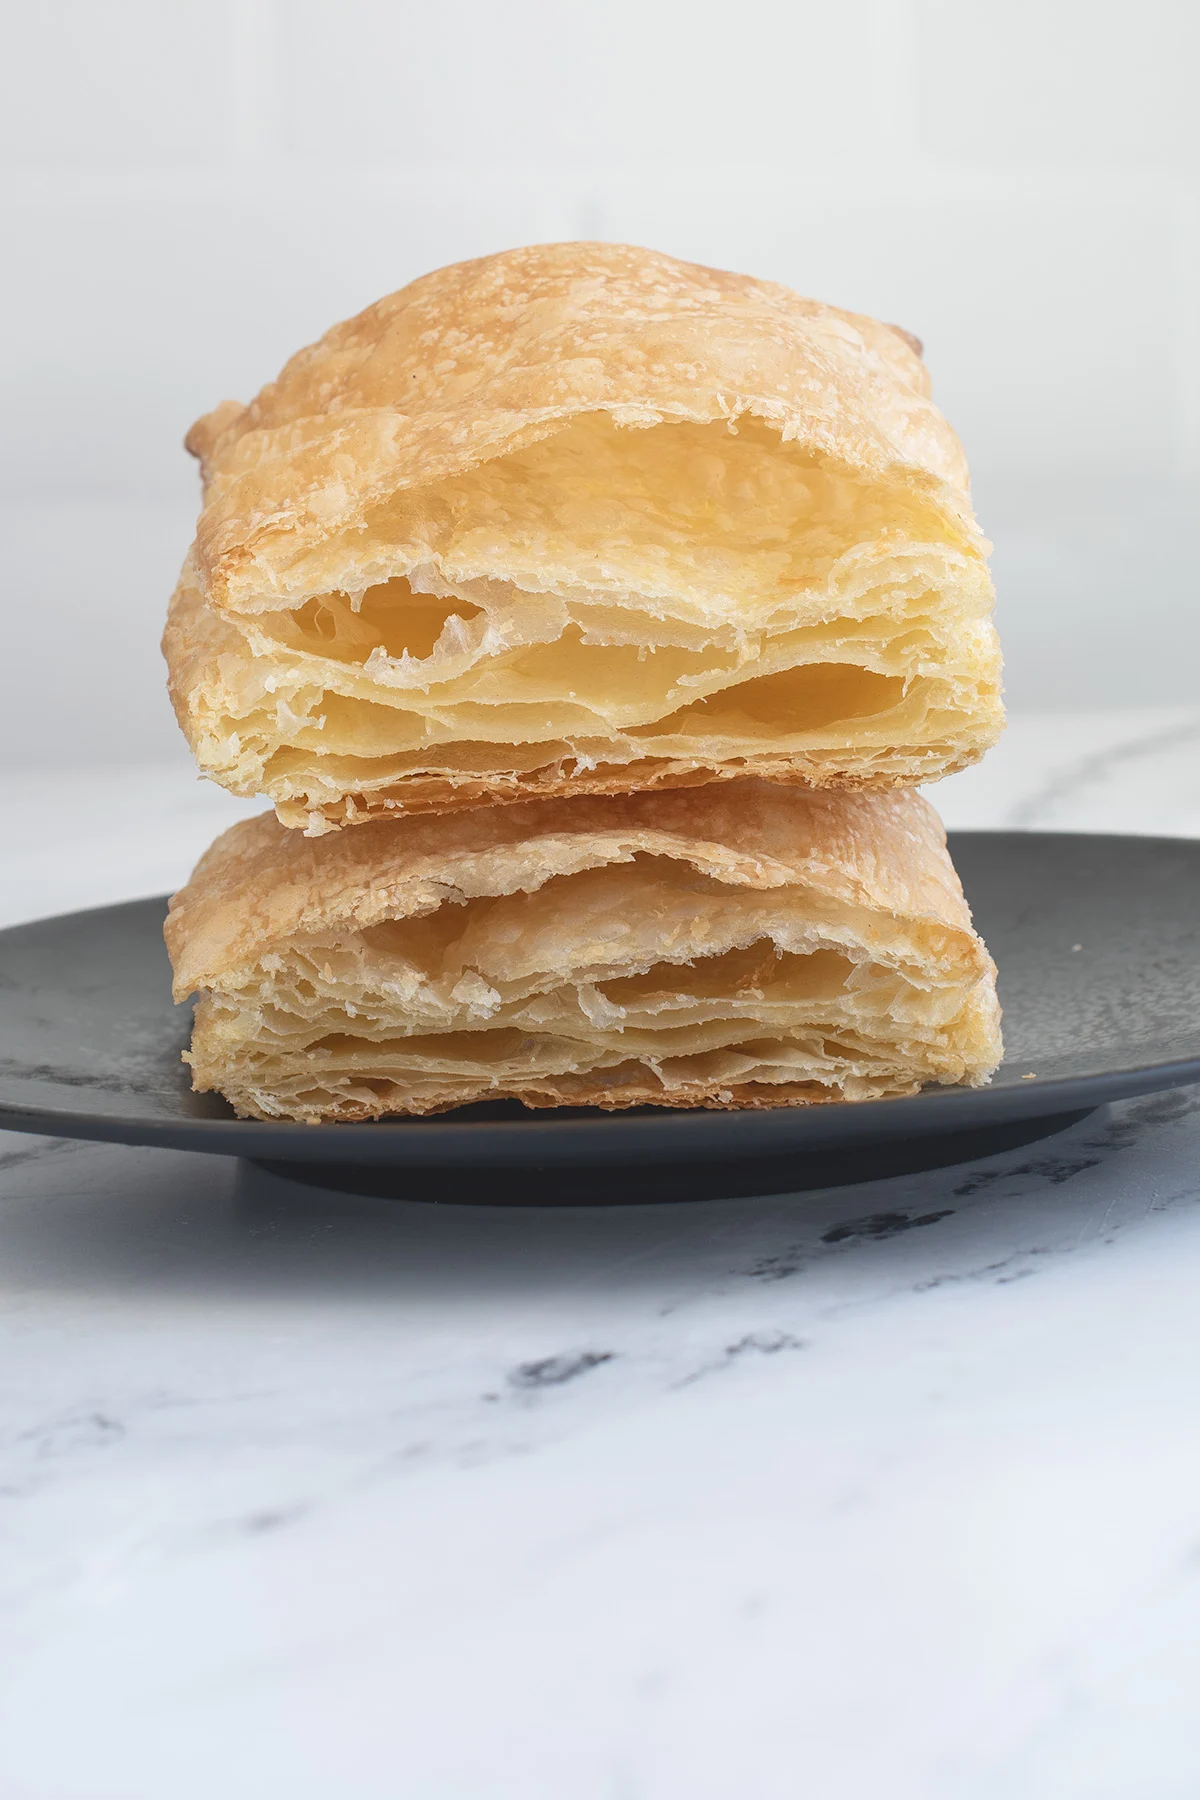 a cross section of baked puff pastry showing layers.